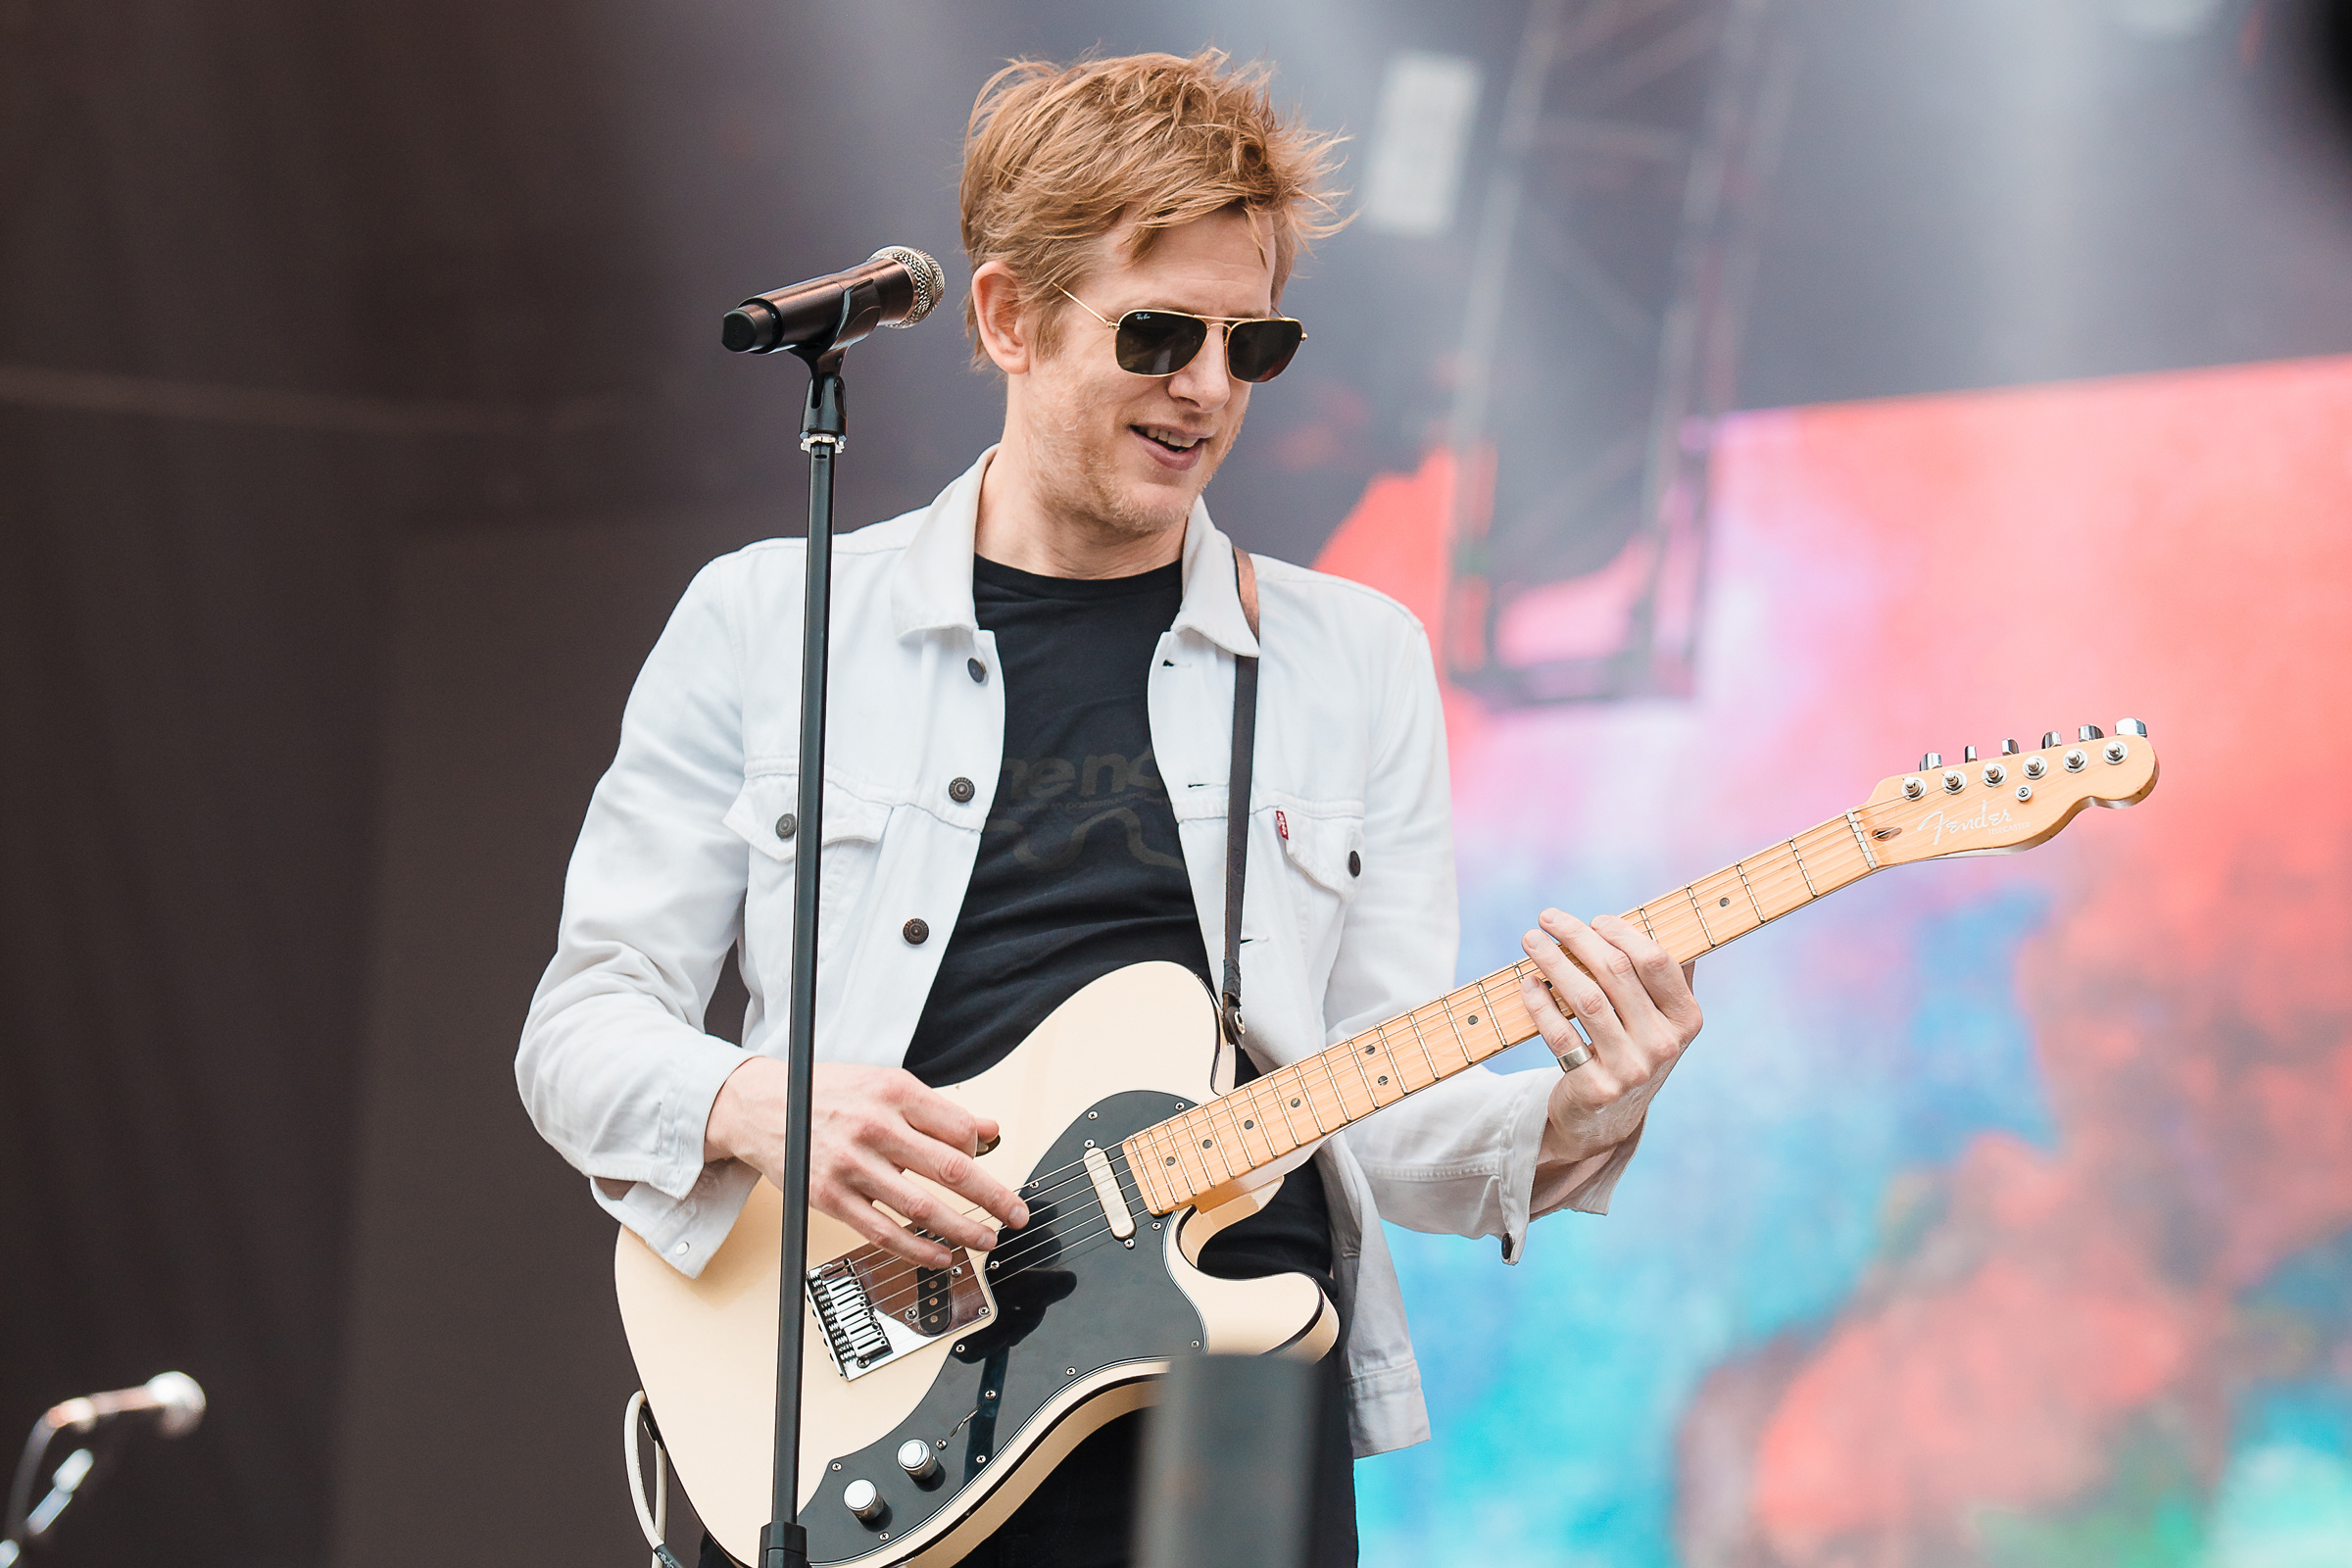 Spoon's hits explored, Intriguing podcast episode, Hidden insights, Rolling Stone revelations, 2400x1600 HD Desktop